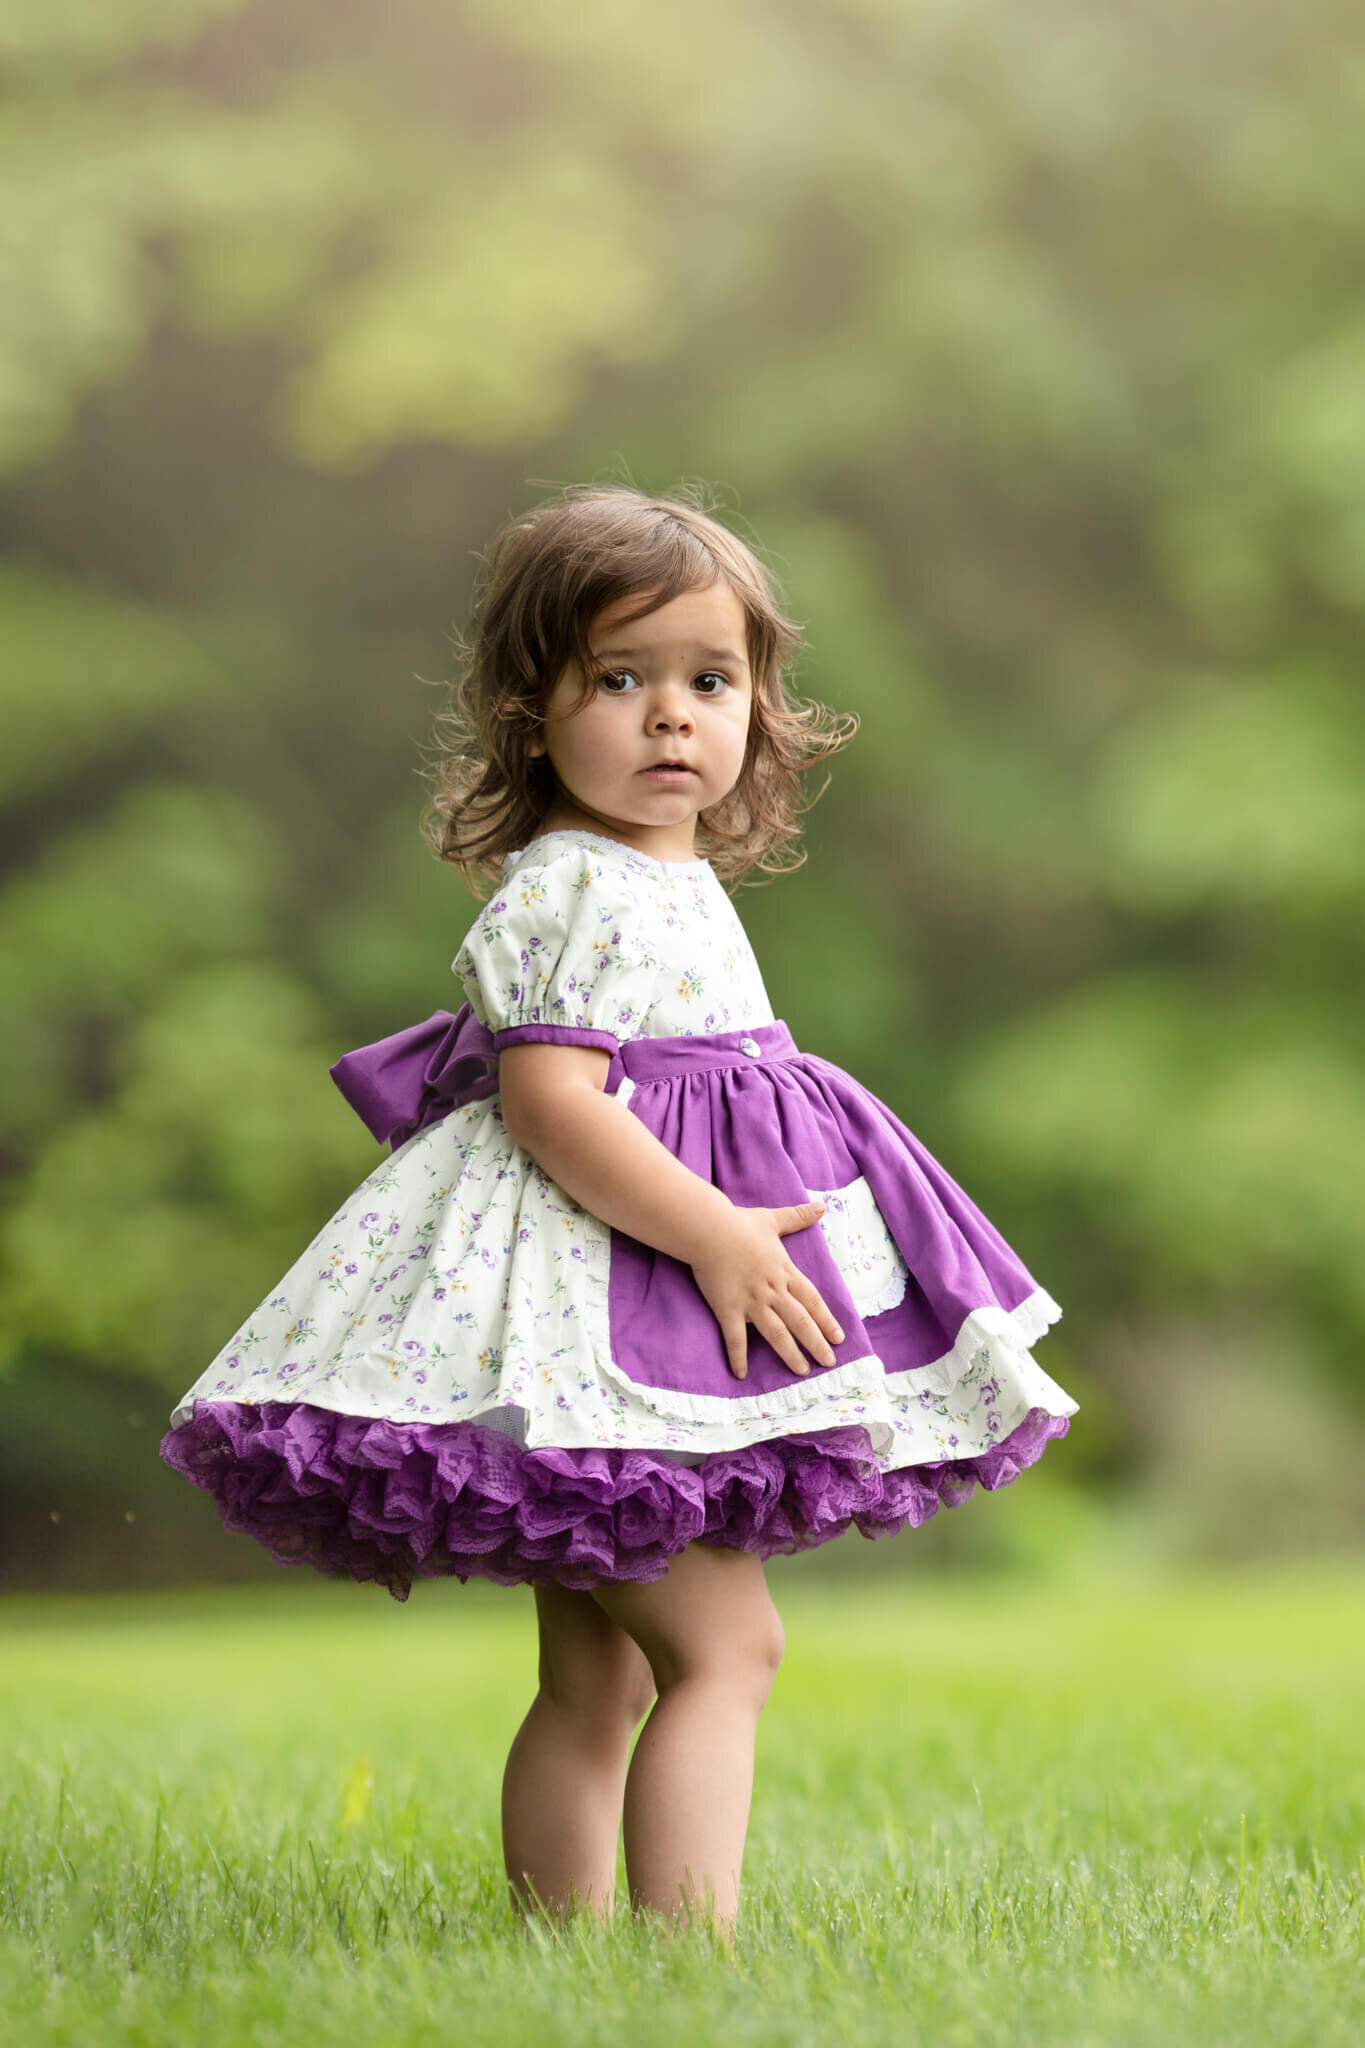 Toddler girl wearing vintage style purple floral dress standing in the grass